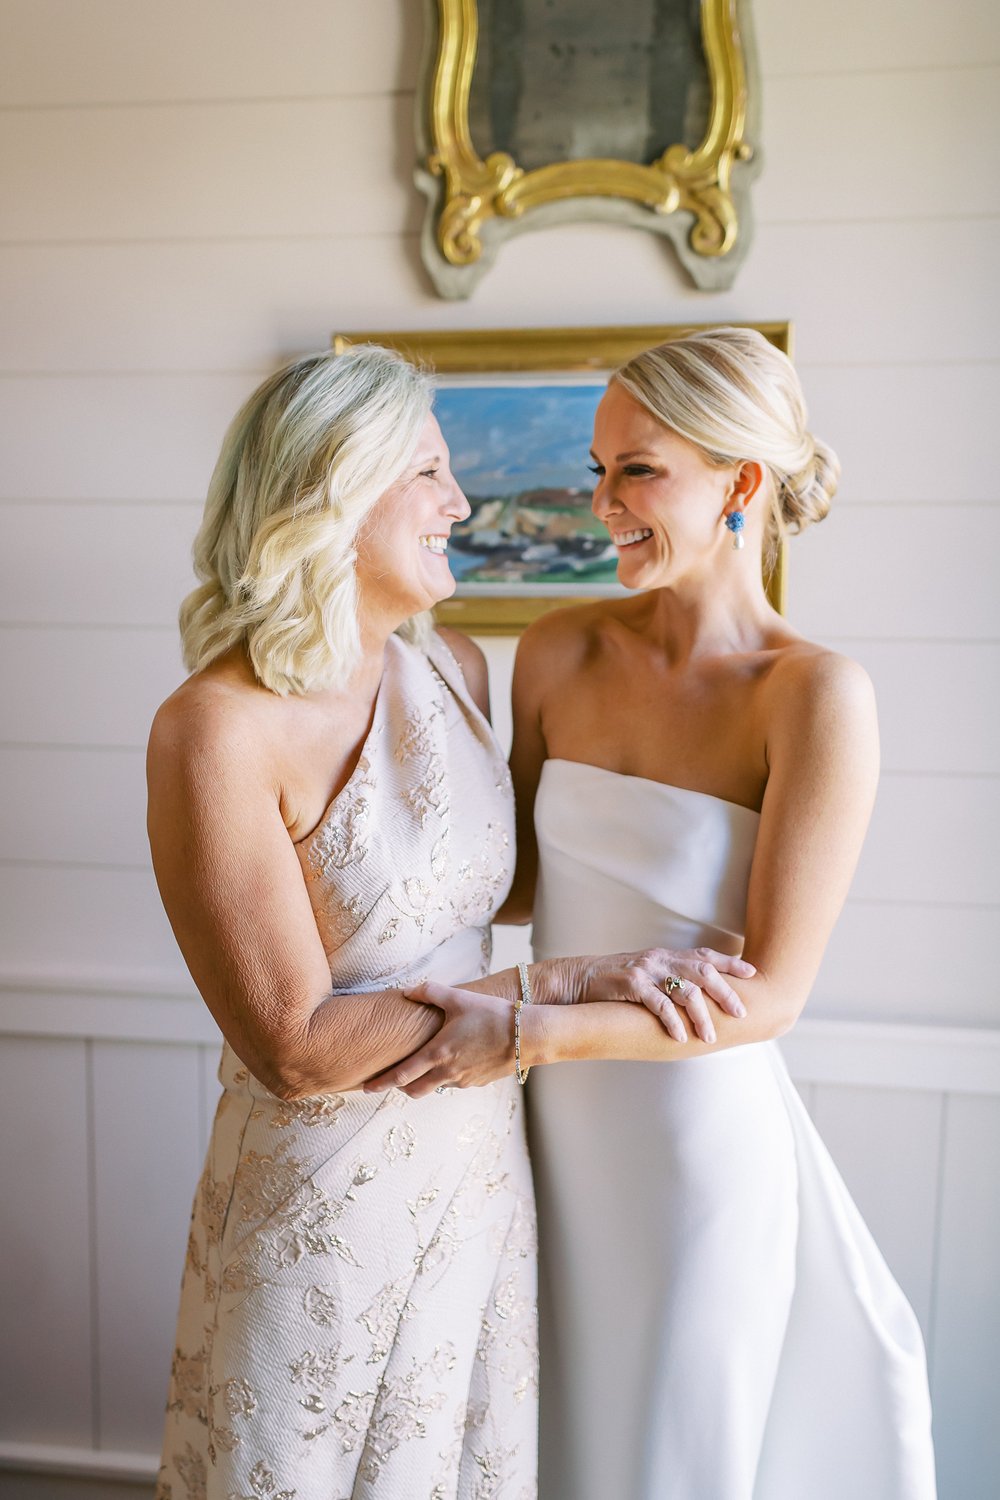 Mom and Bride portrait on wedding day